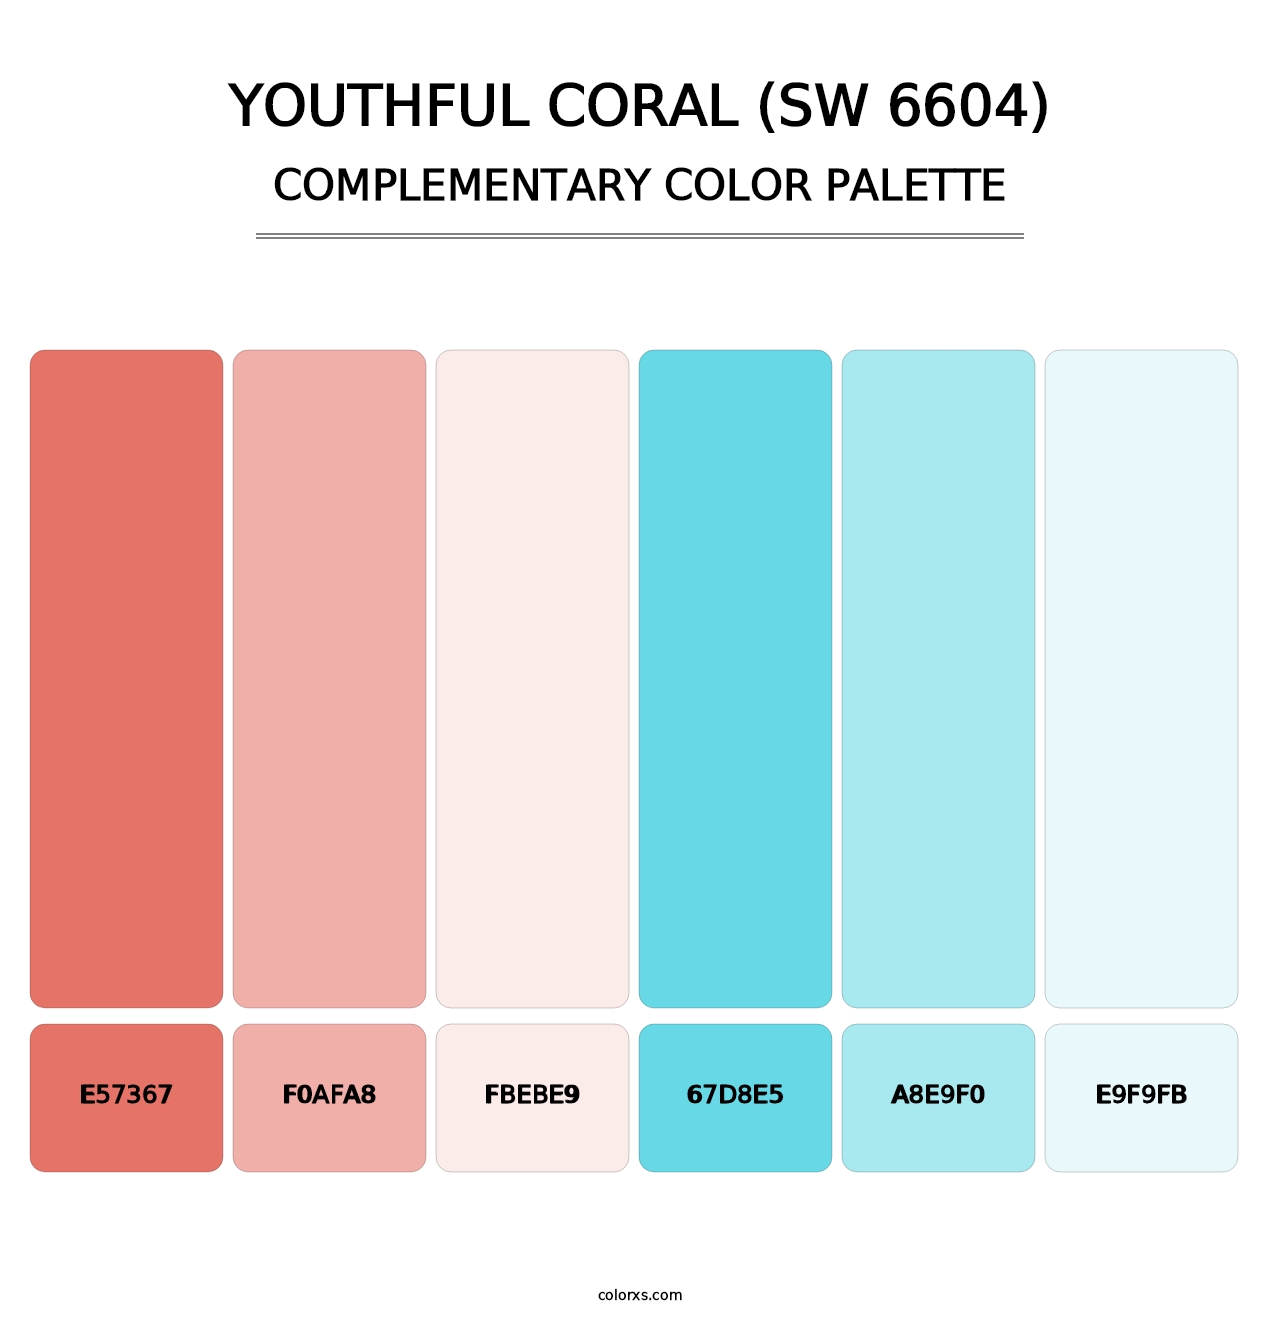 Youthful Coral (SW 6604) - Complementary Color Palette